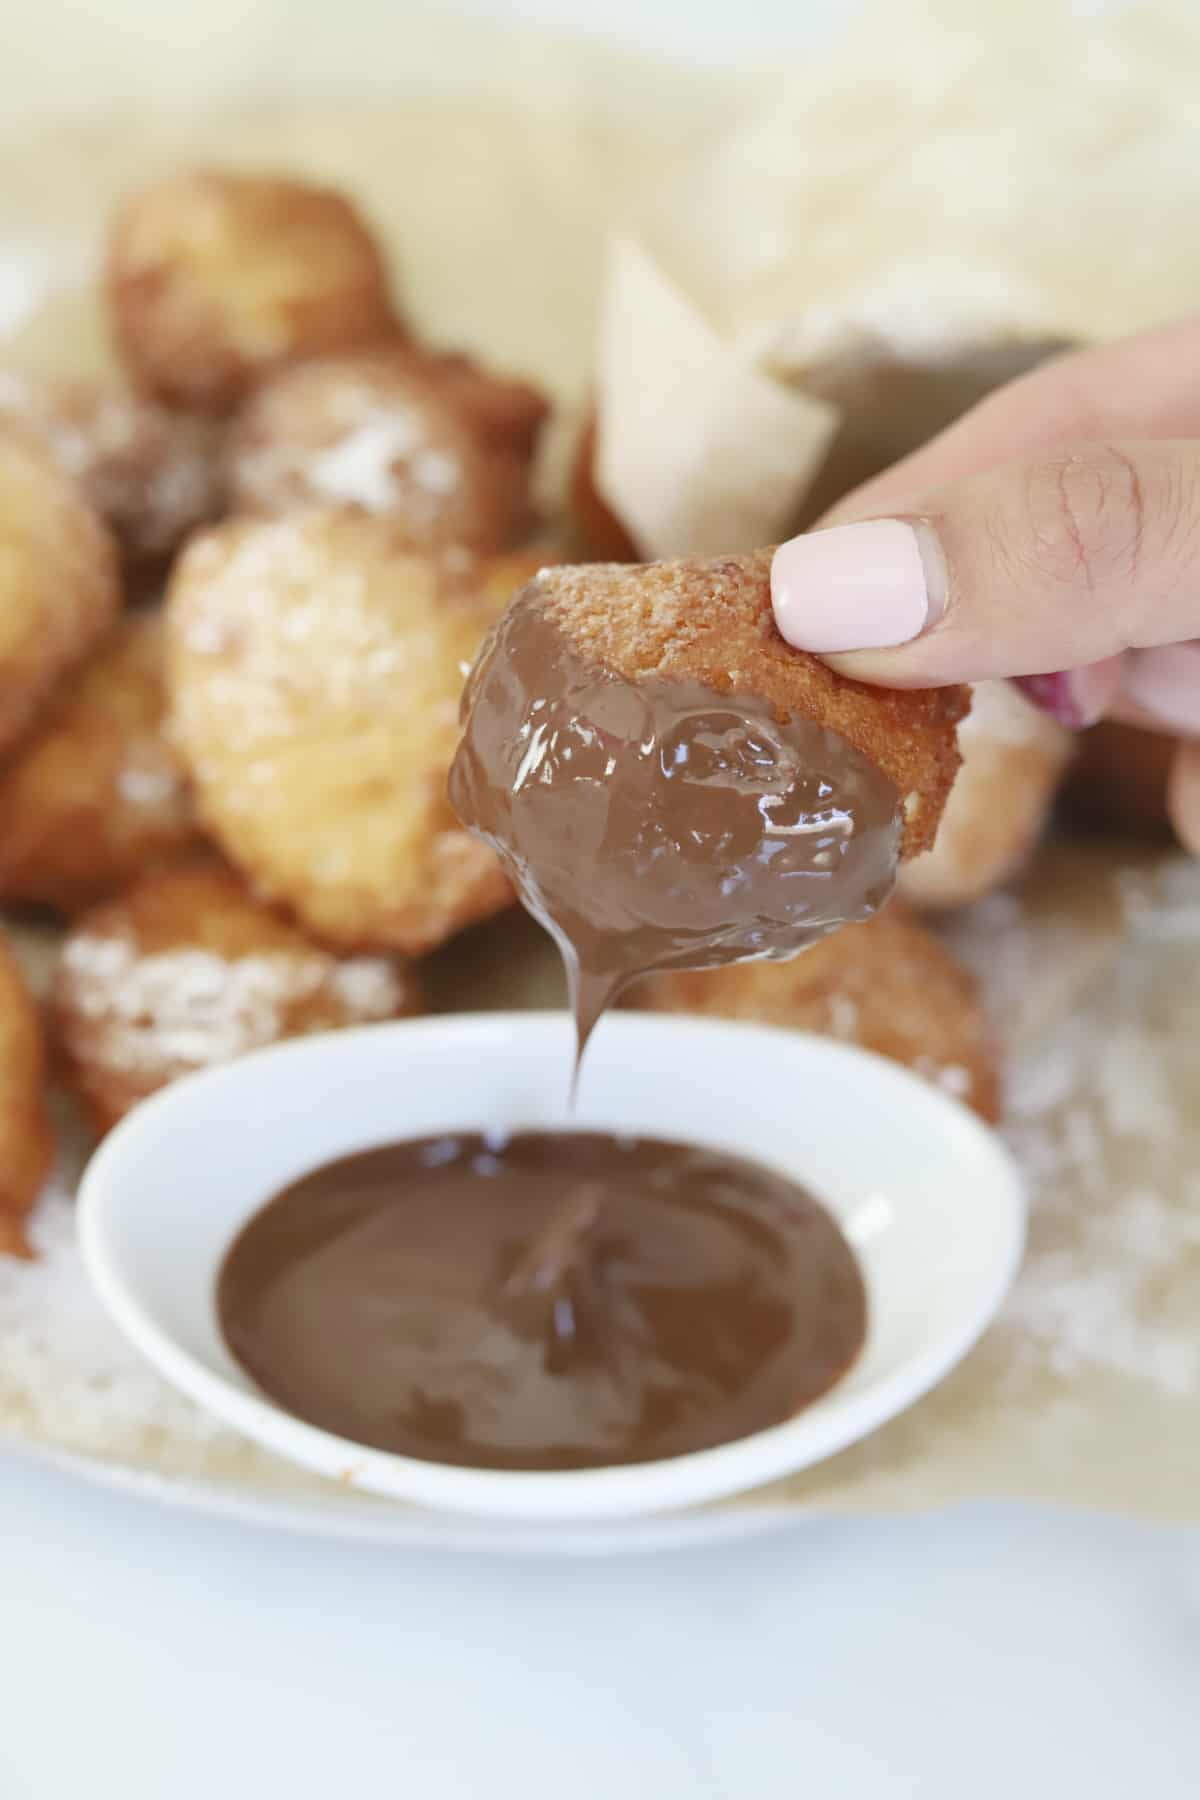 Zeppole being dipped in melted chocolate 